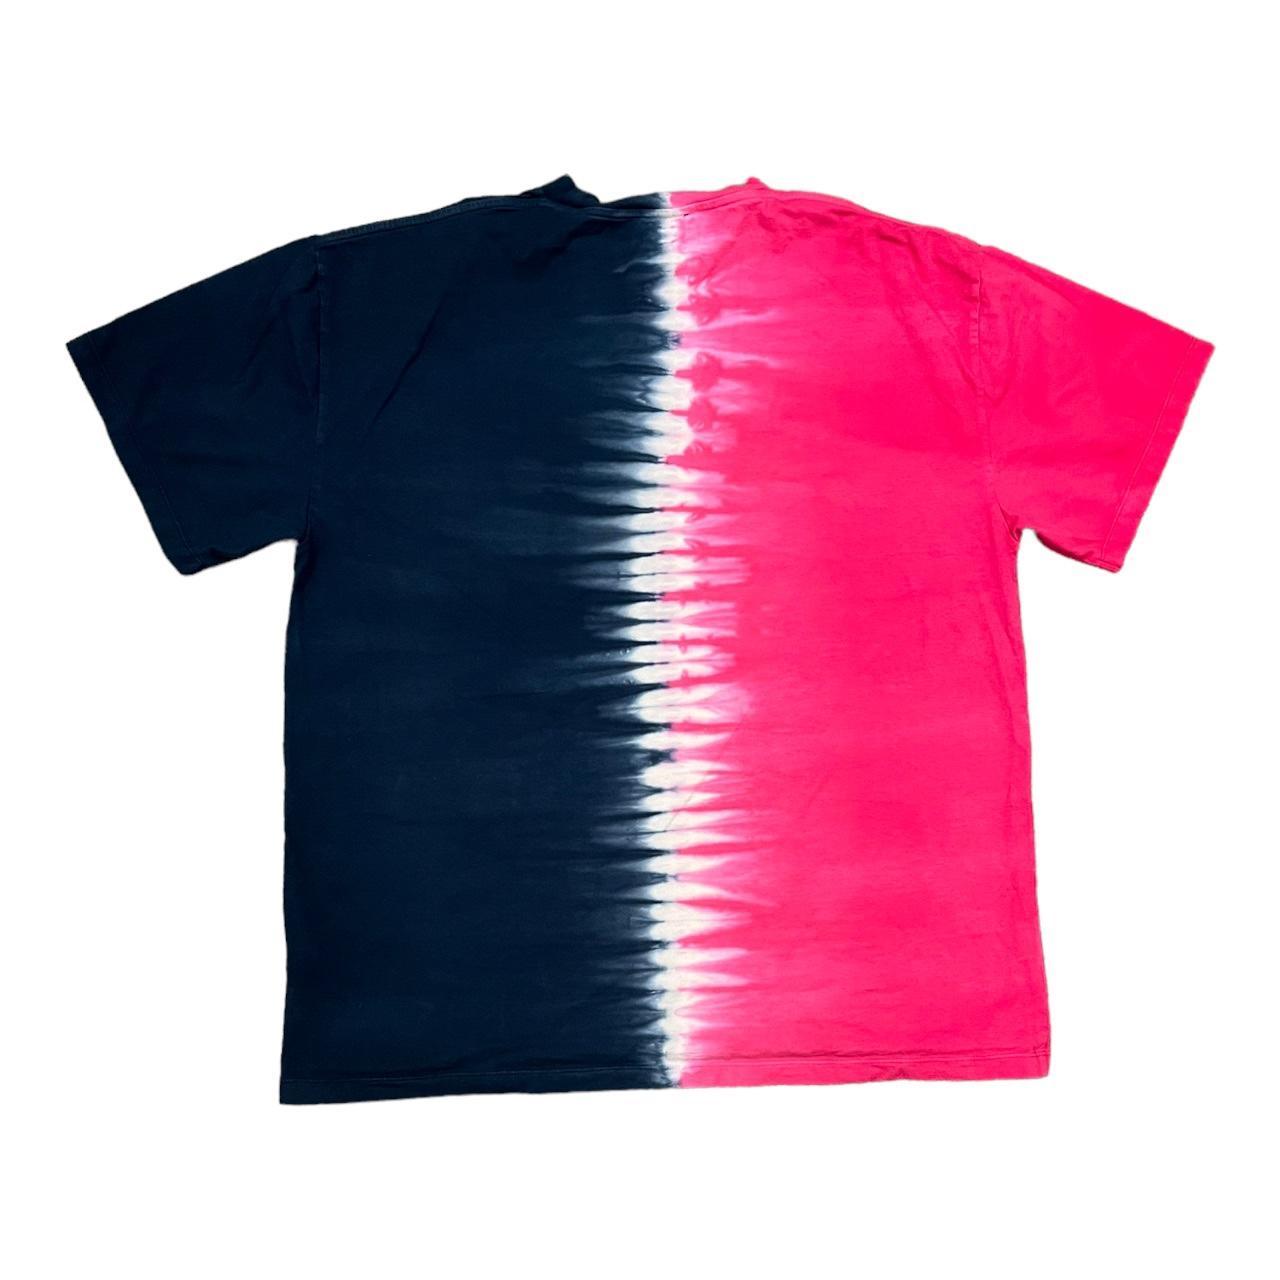 Aries Men's Navy and Pink T-shirt (2)